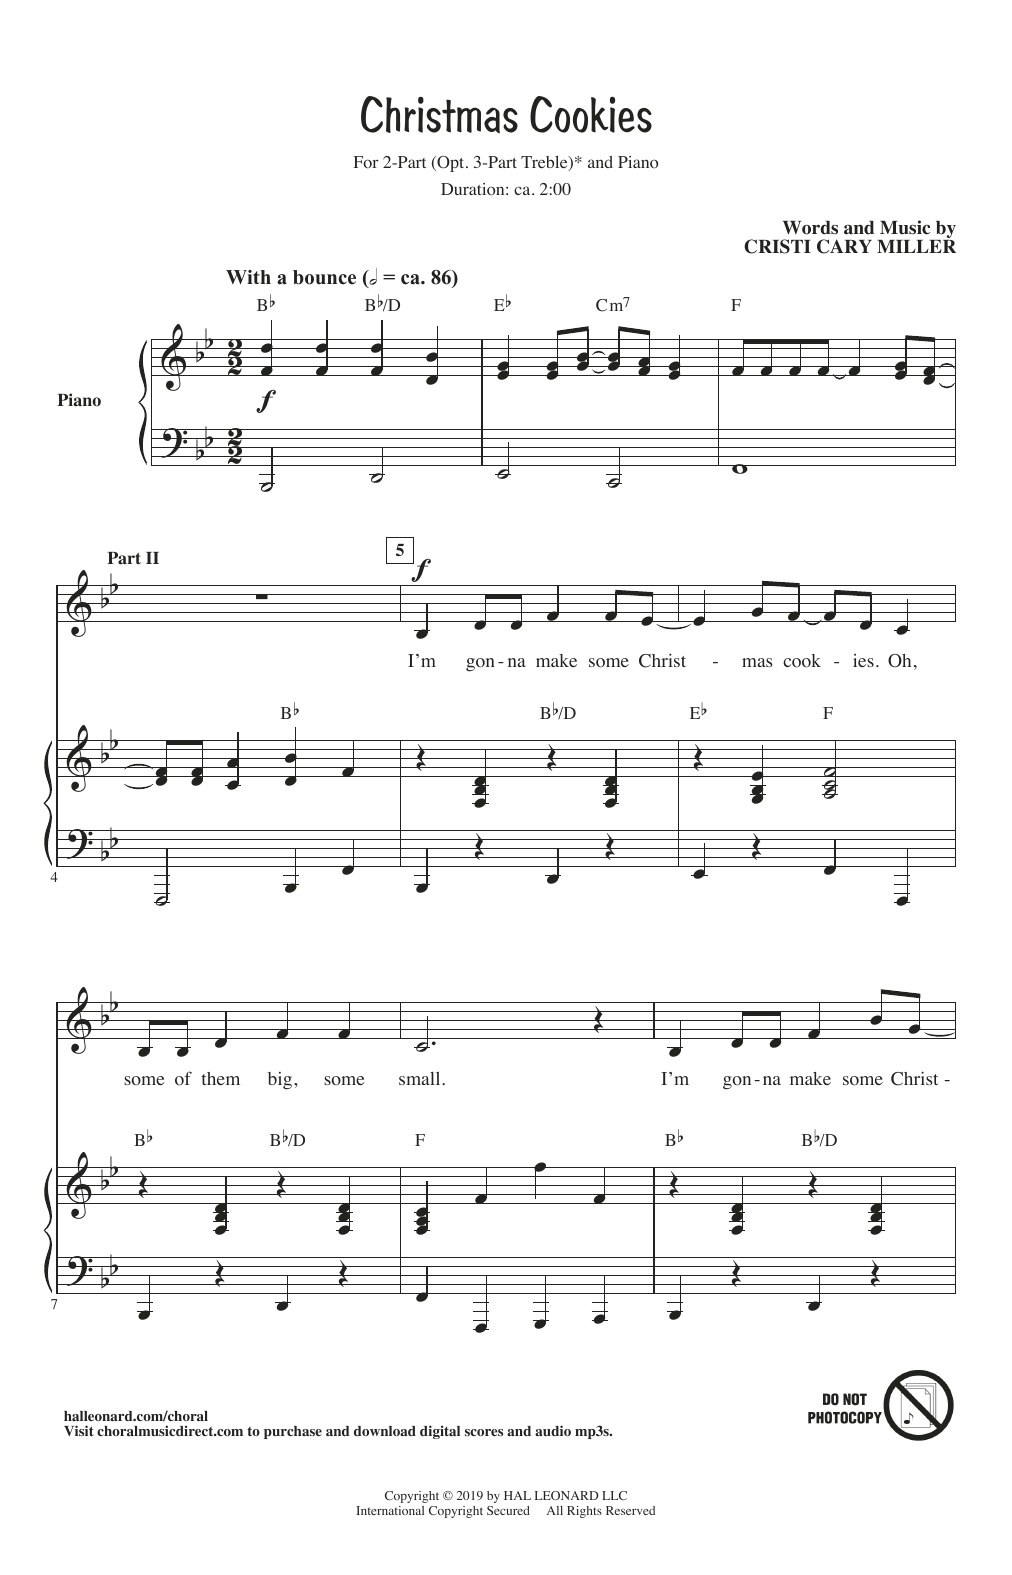 Download Cristi Cary Miller Christmas Cookies Sheet Music